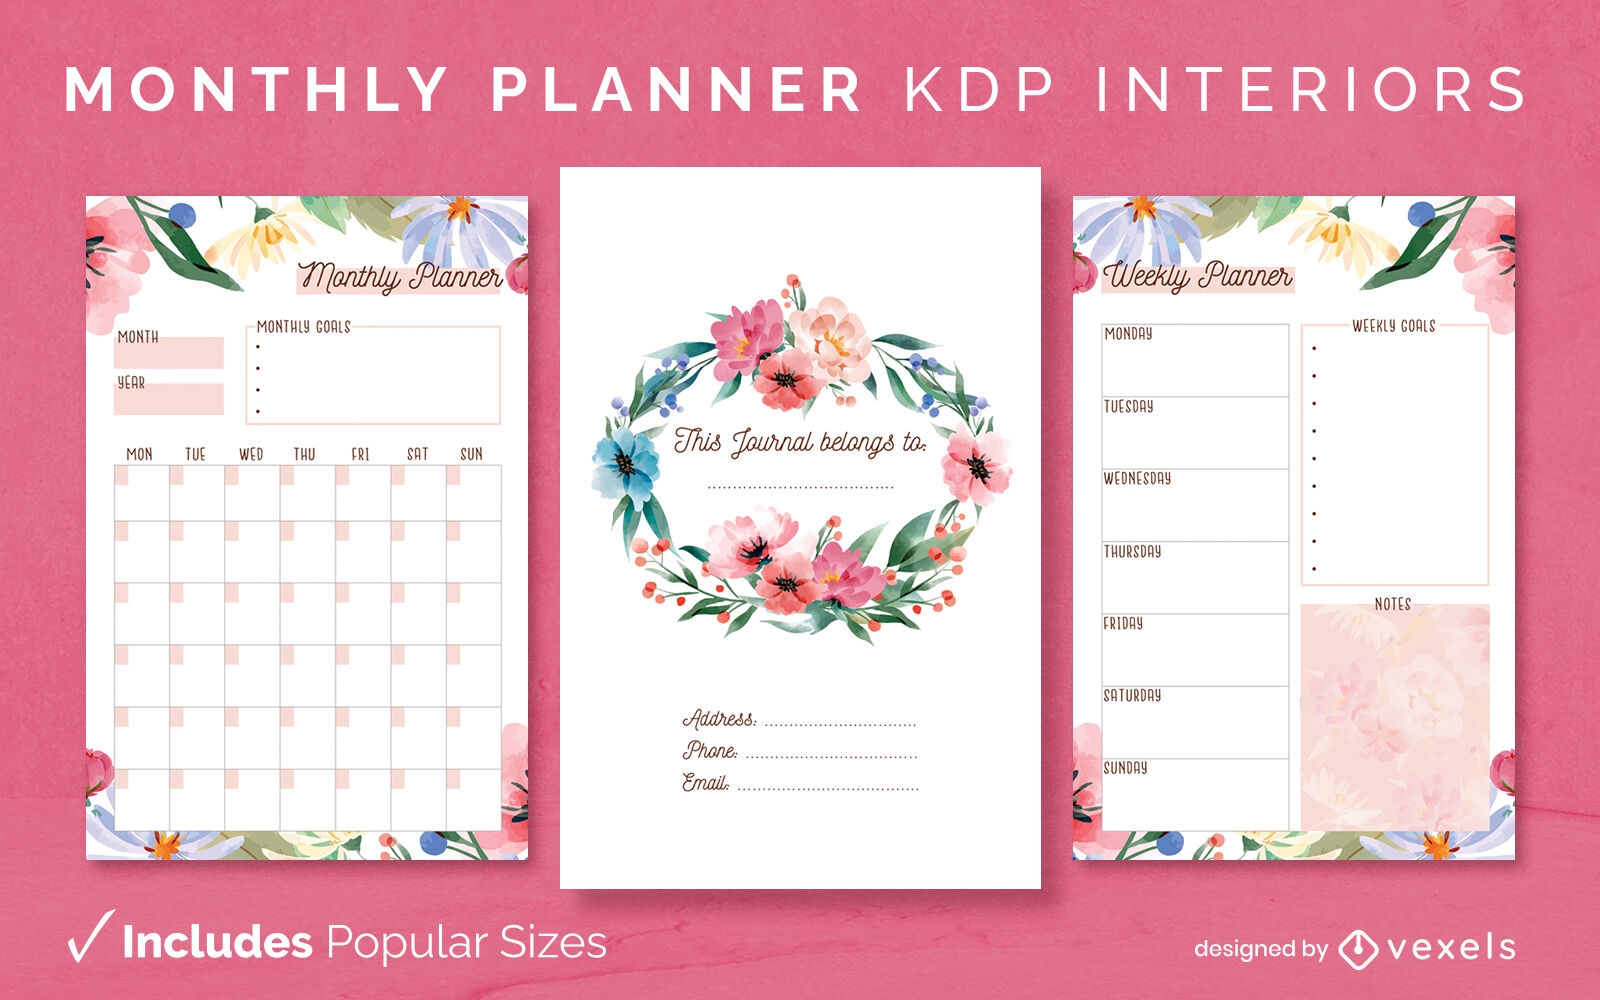 Floral monthly planner diary design template KDP